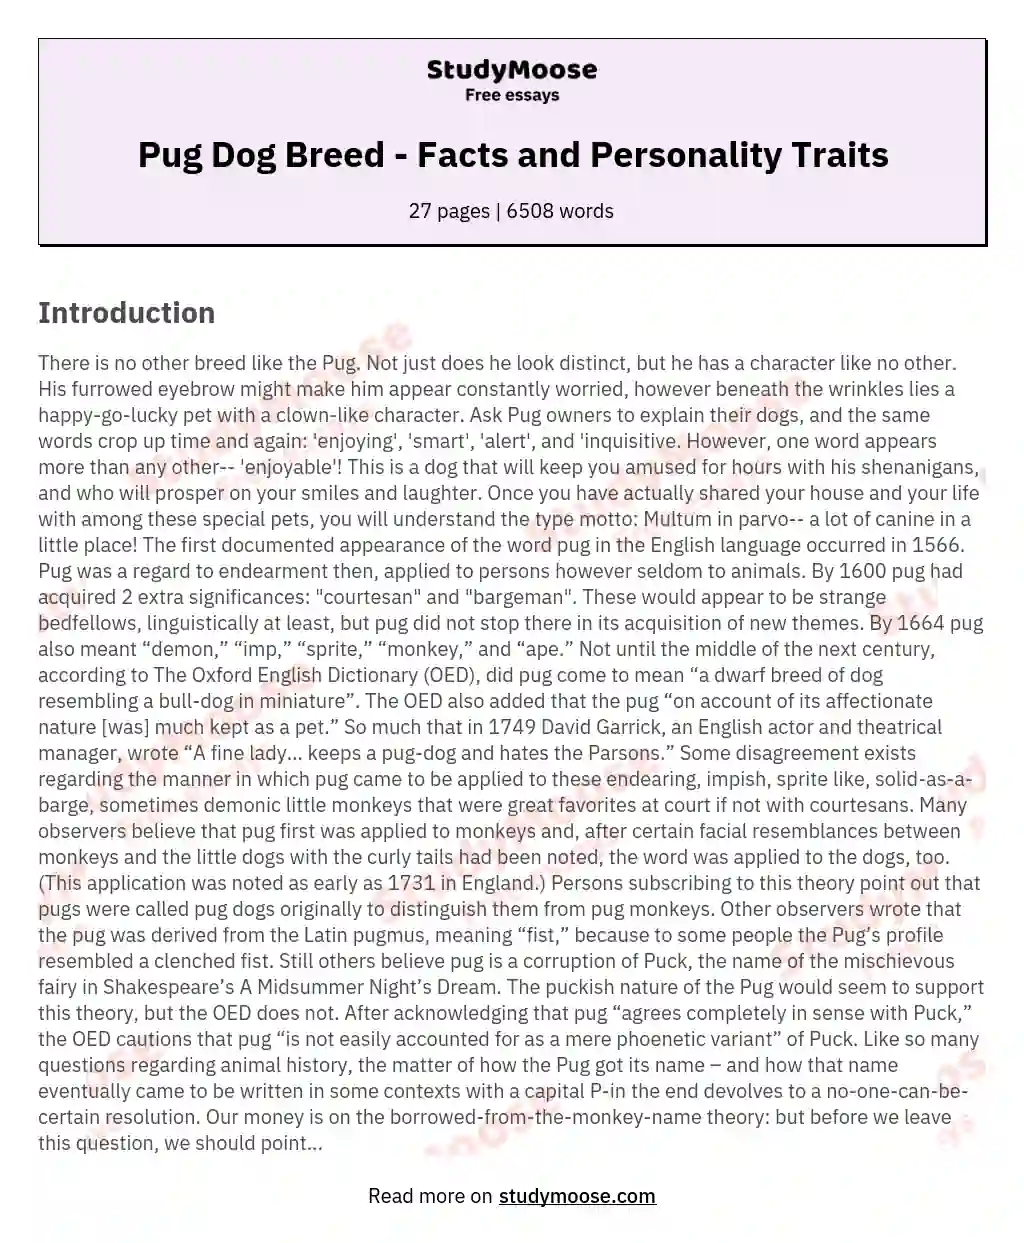 Pug Dog Breed - Facts and Personality Traits